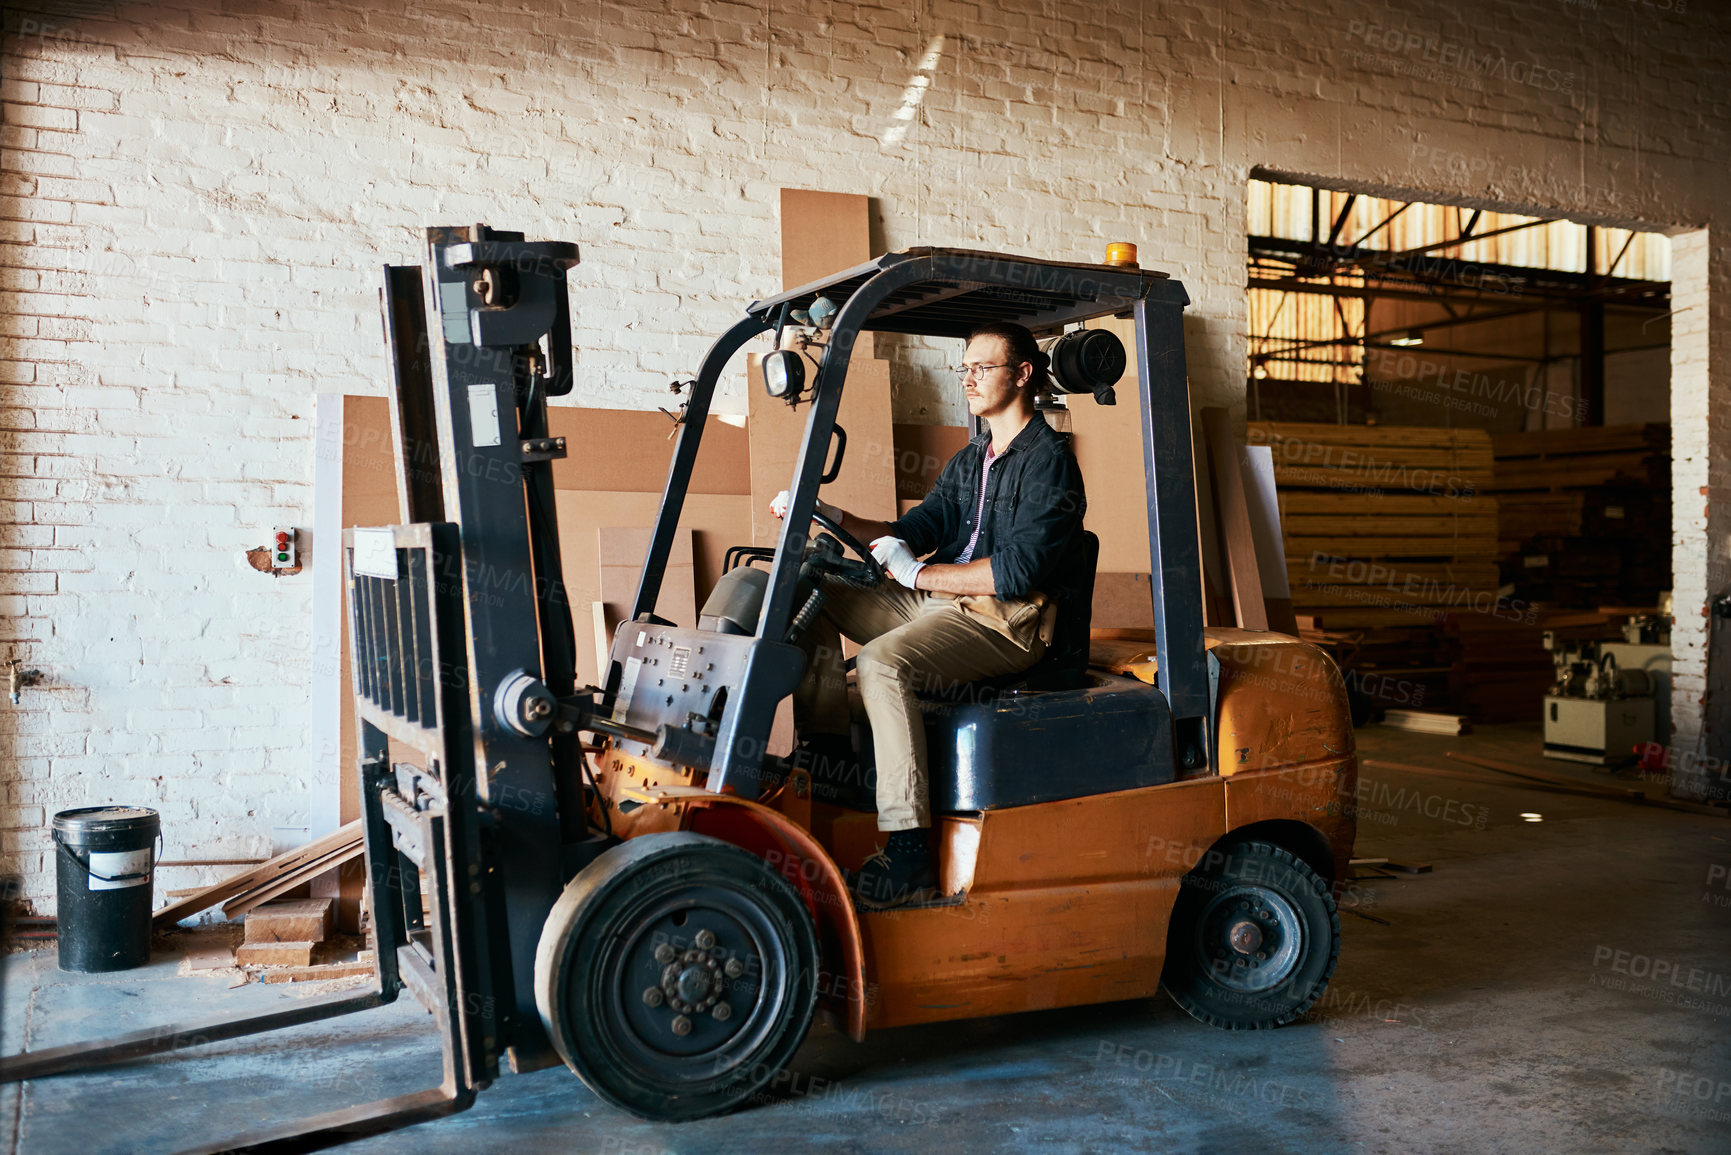 Buy stock photo Shot of a young male warehouse worker driving a forklift